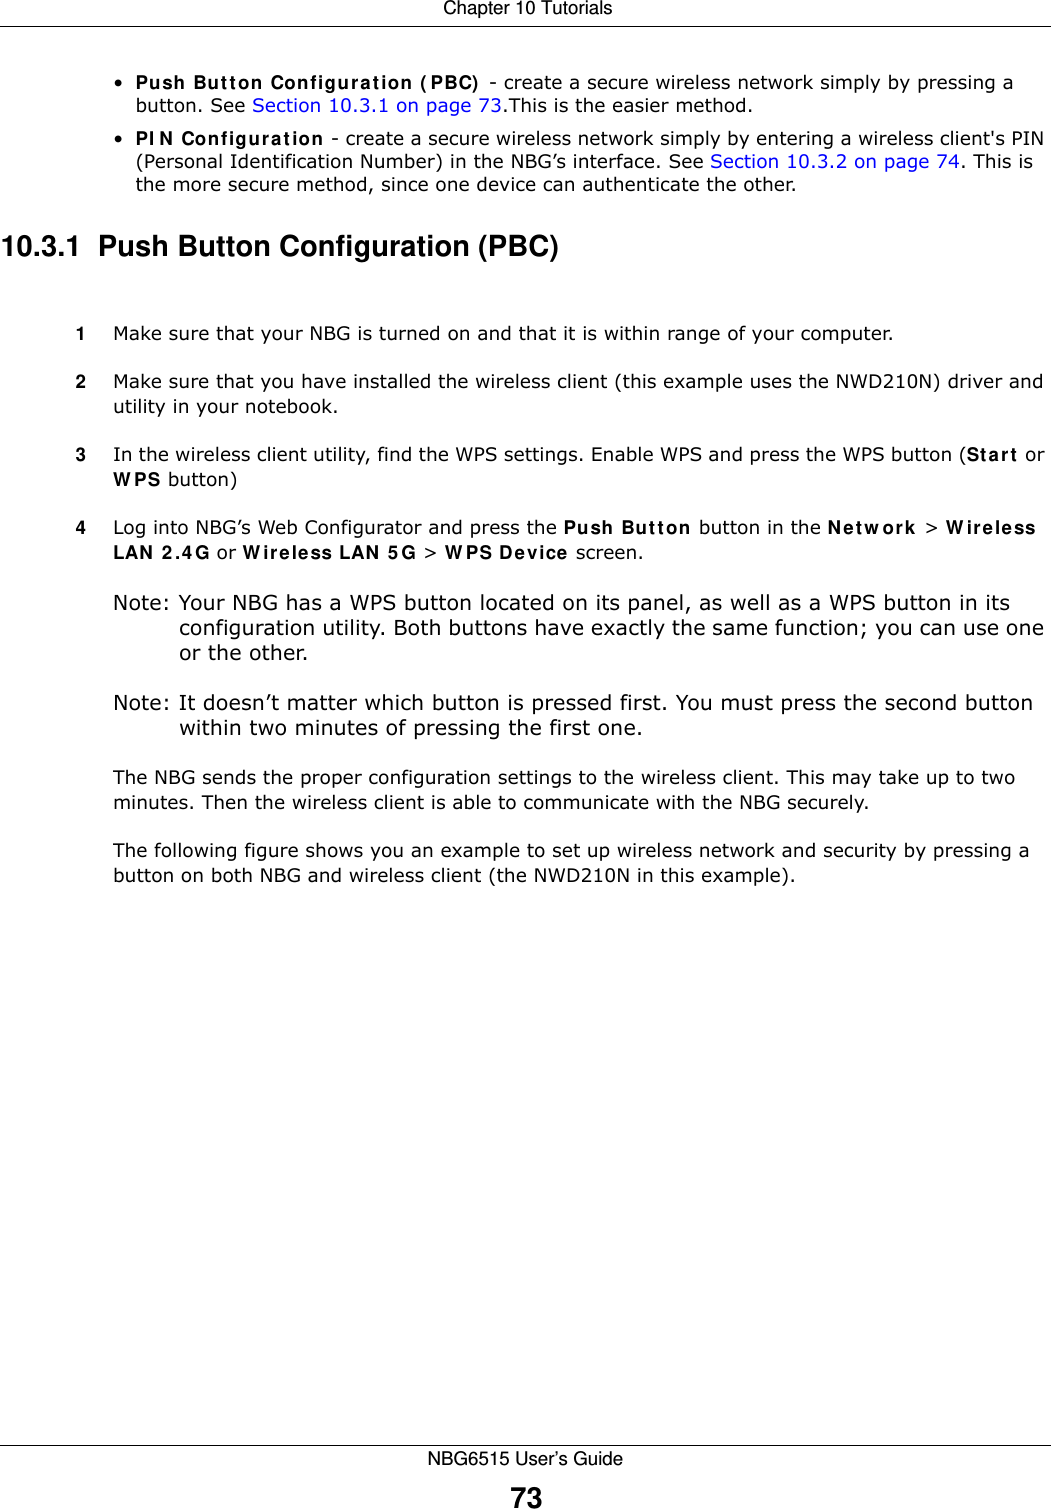  Chapter 10 TutorialsNBG6515 User’s Guide73•Push Button Configuration (PBC) - create a secure wireless network simply by pressing a button. See Section 10.3.1 on page 73.This is the easier method.•PIN Configuration - create a secure wireless network simply by entering a wireless client&apos;s PIN (Personal Identification Number) in the NBG’s interface. See Section 10.3.2 on page 74. This is the more secure method, since one device can authenticate the other.10.3.1  Push Button Configuration (PBC)1Make sure that your NBG is turned on and that it is within range of your computer. 2Make sure that you have installed the wireless client (this example uses the NWD210N) driver and utility in your notebook.3In the wireless client utility, find the WPS settings. Enable WPS and press the WPS button (Start or WPS button)4Log into NBG’s Web Configurator and press the Push Button button in the Network &gt; Wireless LAN 2.4G or Wireless LAN 5G &gt; WPS Device screen. Note: Your NBG has a WPS button located on its panel, as well as a WPS button in its configuration utility. Both buttons have exactly the same function; you can use one or the other.Note: It doesn’t matter which button is pressed first. You must press the second button within two minutes of pressing the first one. The NBG sends the proper configuration settings to the wireless client. This may take up to two minutes. Then the wireless client is able to communicate with the NBG securely. The following figure shows you an example to set up wireless network and security by pressing a button on both NBG and wireless client (the NWD210N in this example).